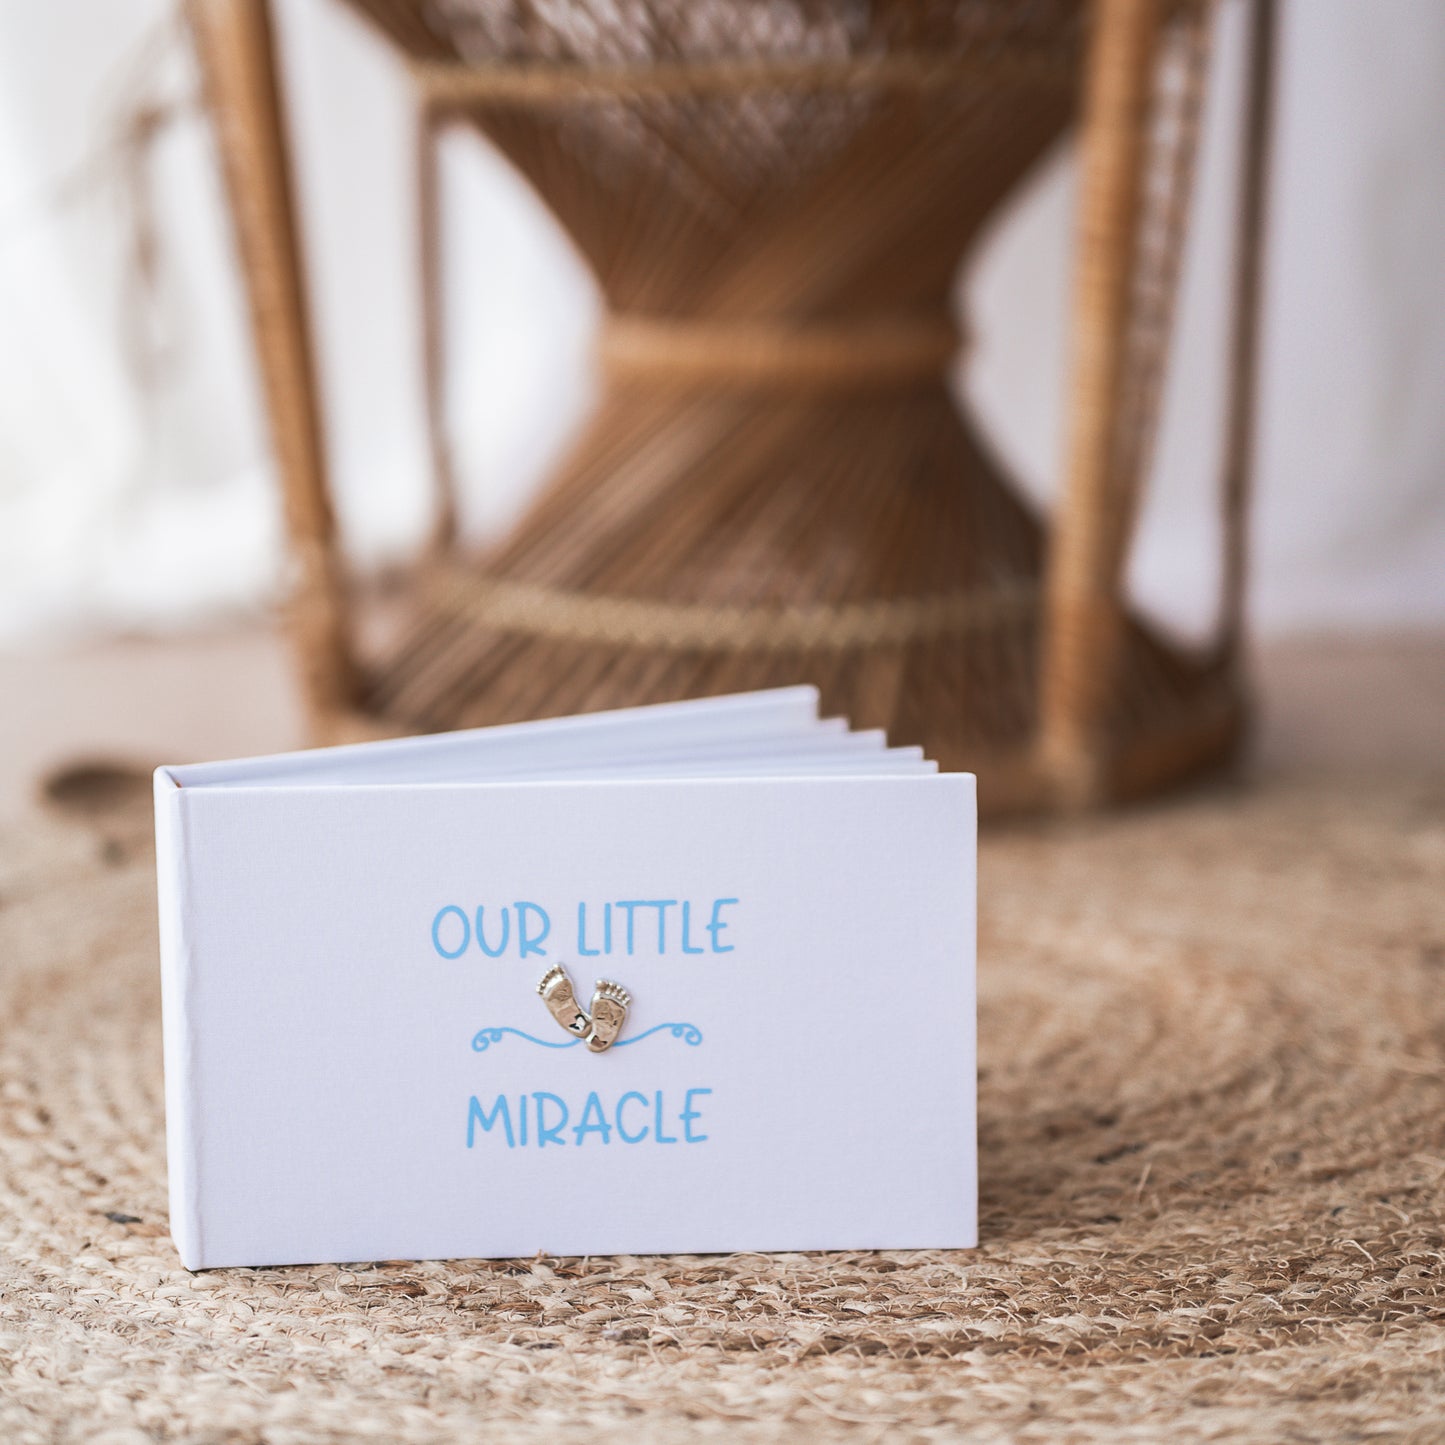 Our little miracle ~ Gorgeous shiny footprint design on a smart white linen album with soft blue/pink printed design